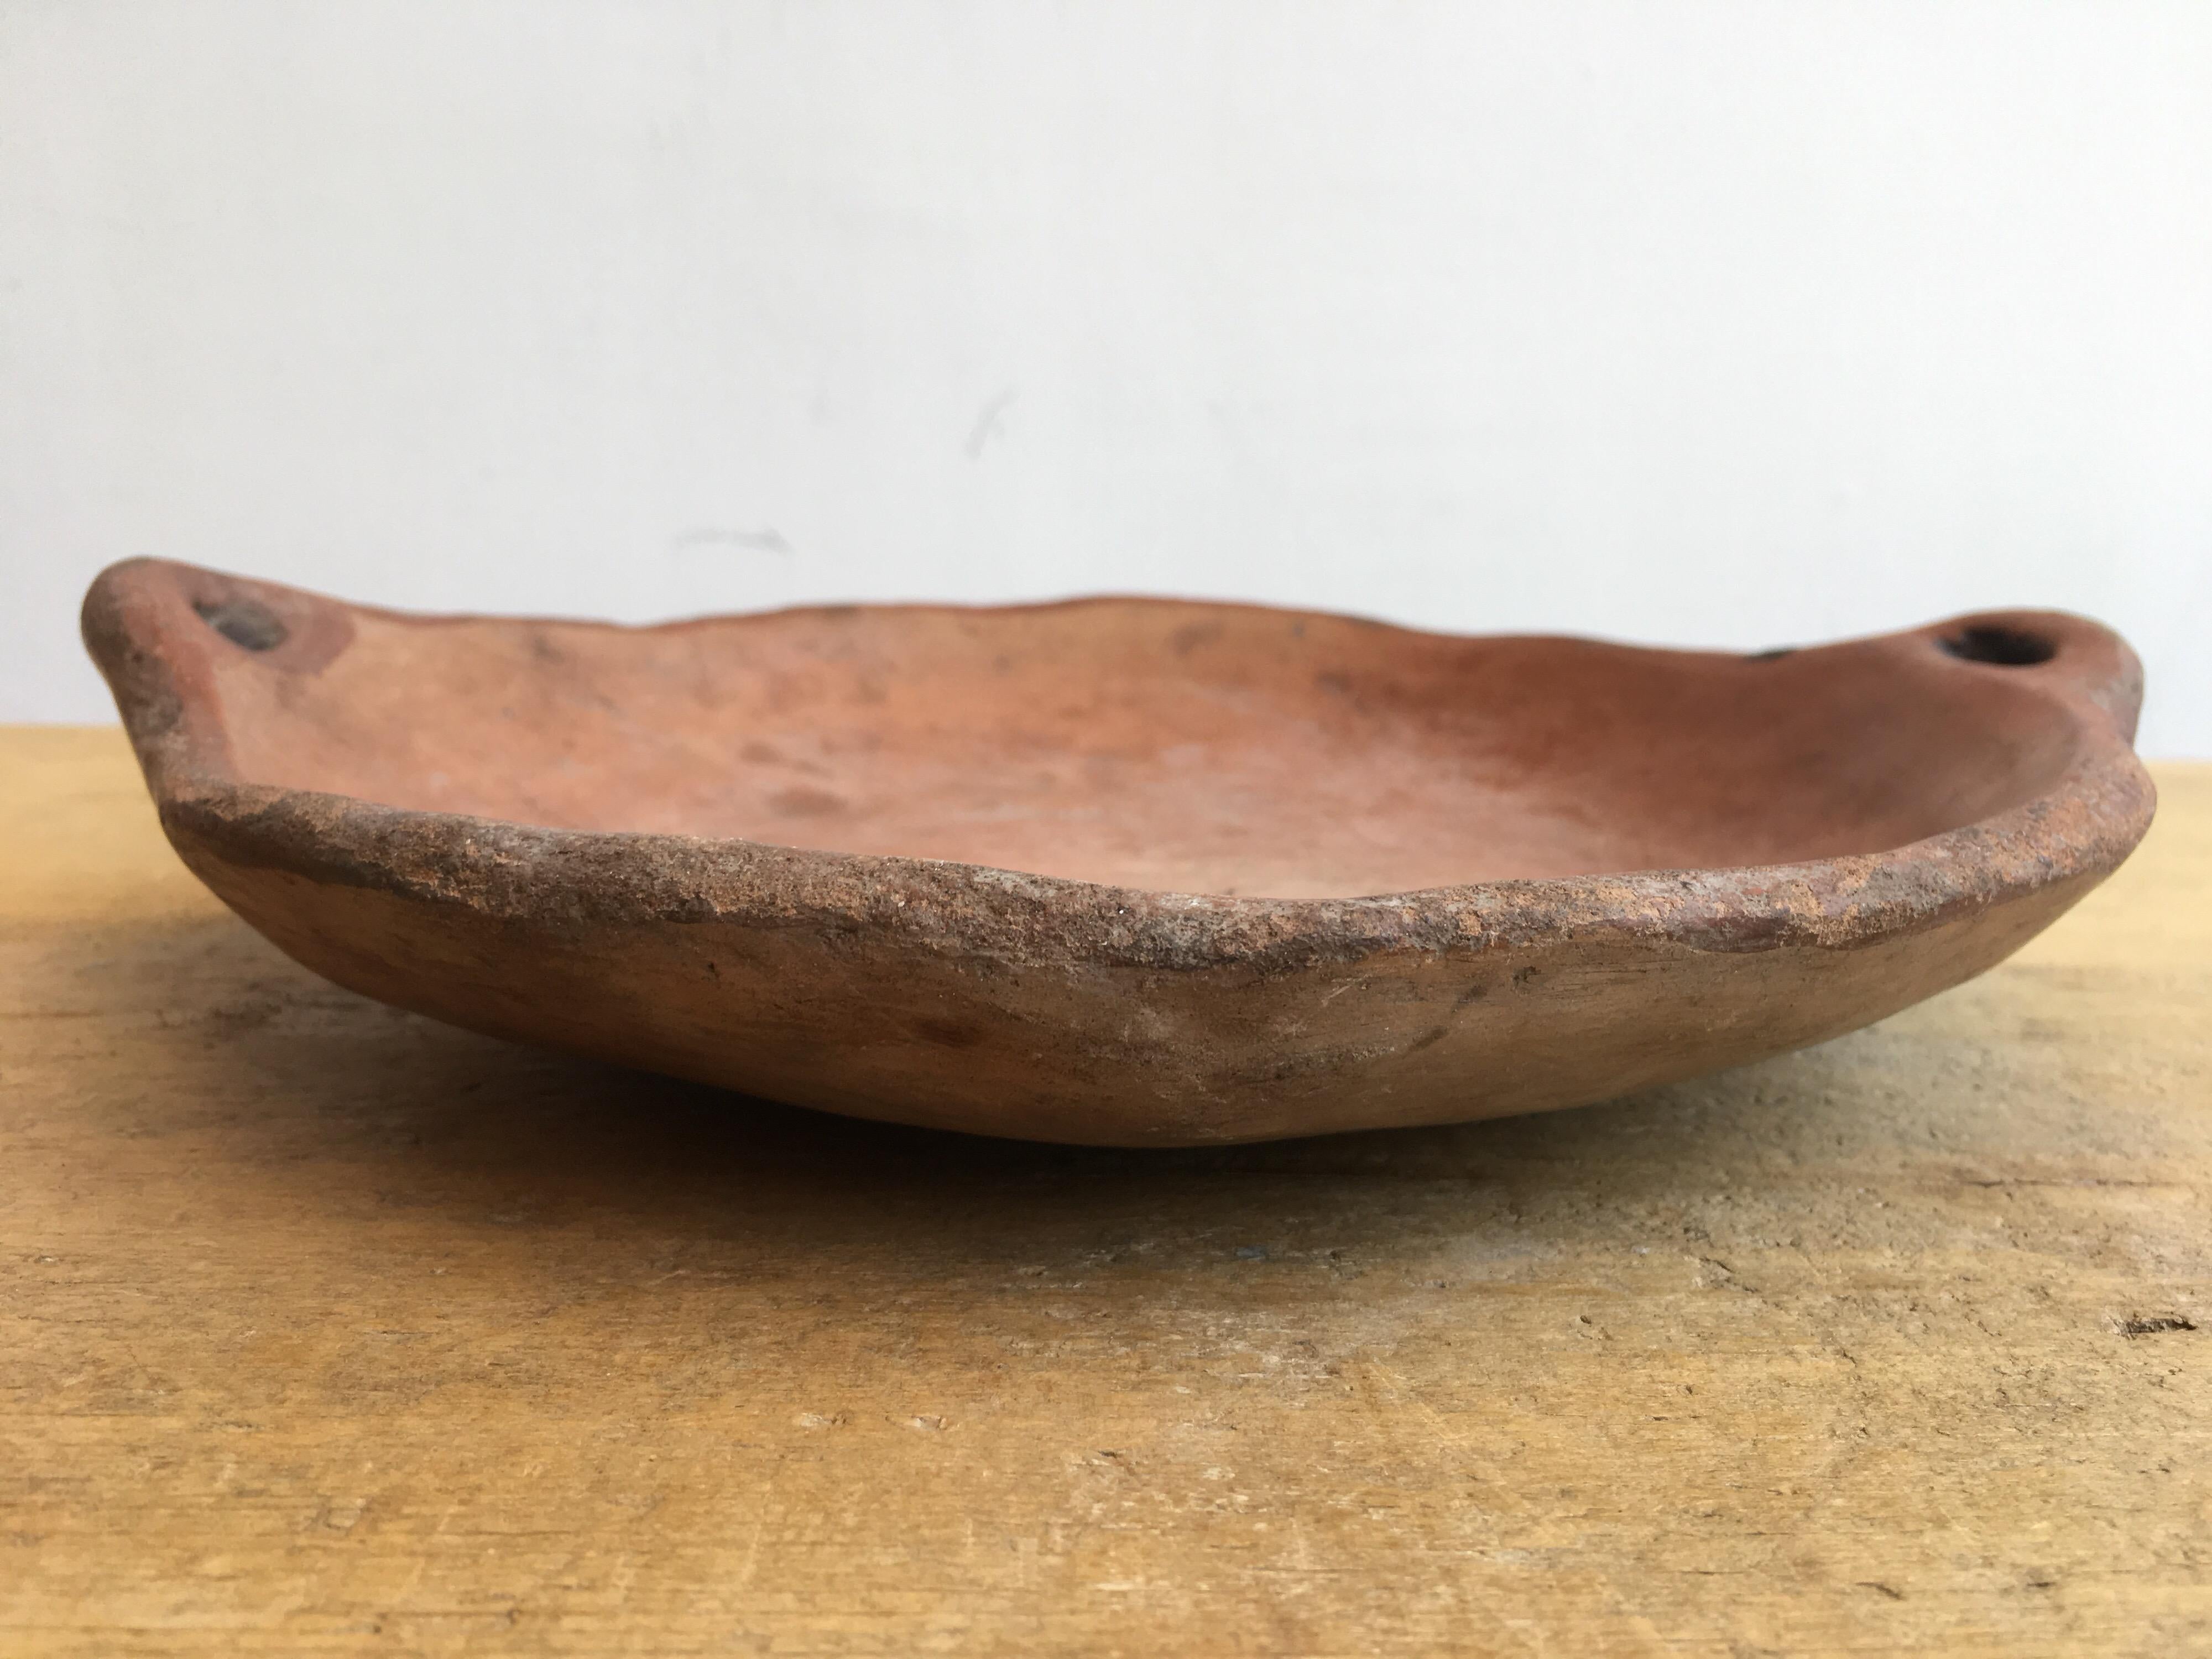 Rustic Terracotta Plate from Guerrero, Mexico